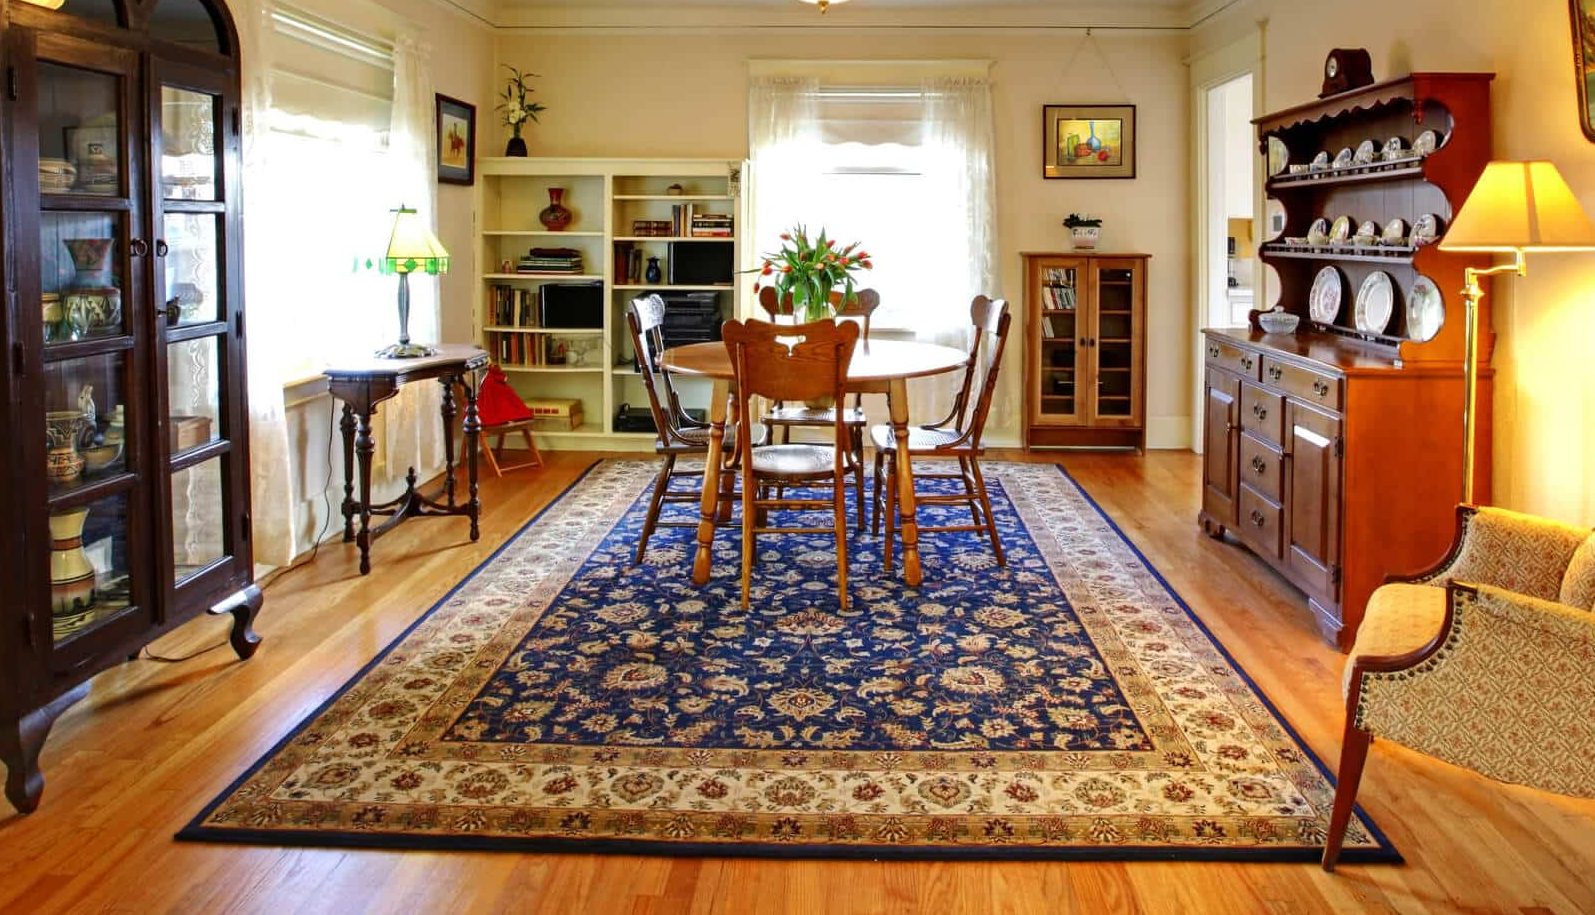 Area Rug Damage Your Hardwood Floor, Rugs To Protect Hardwood Floors From Water